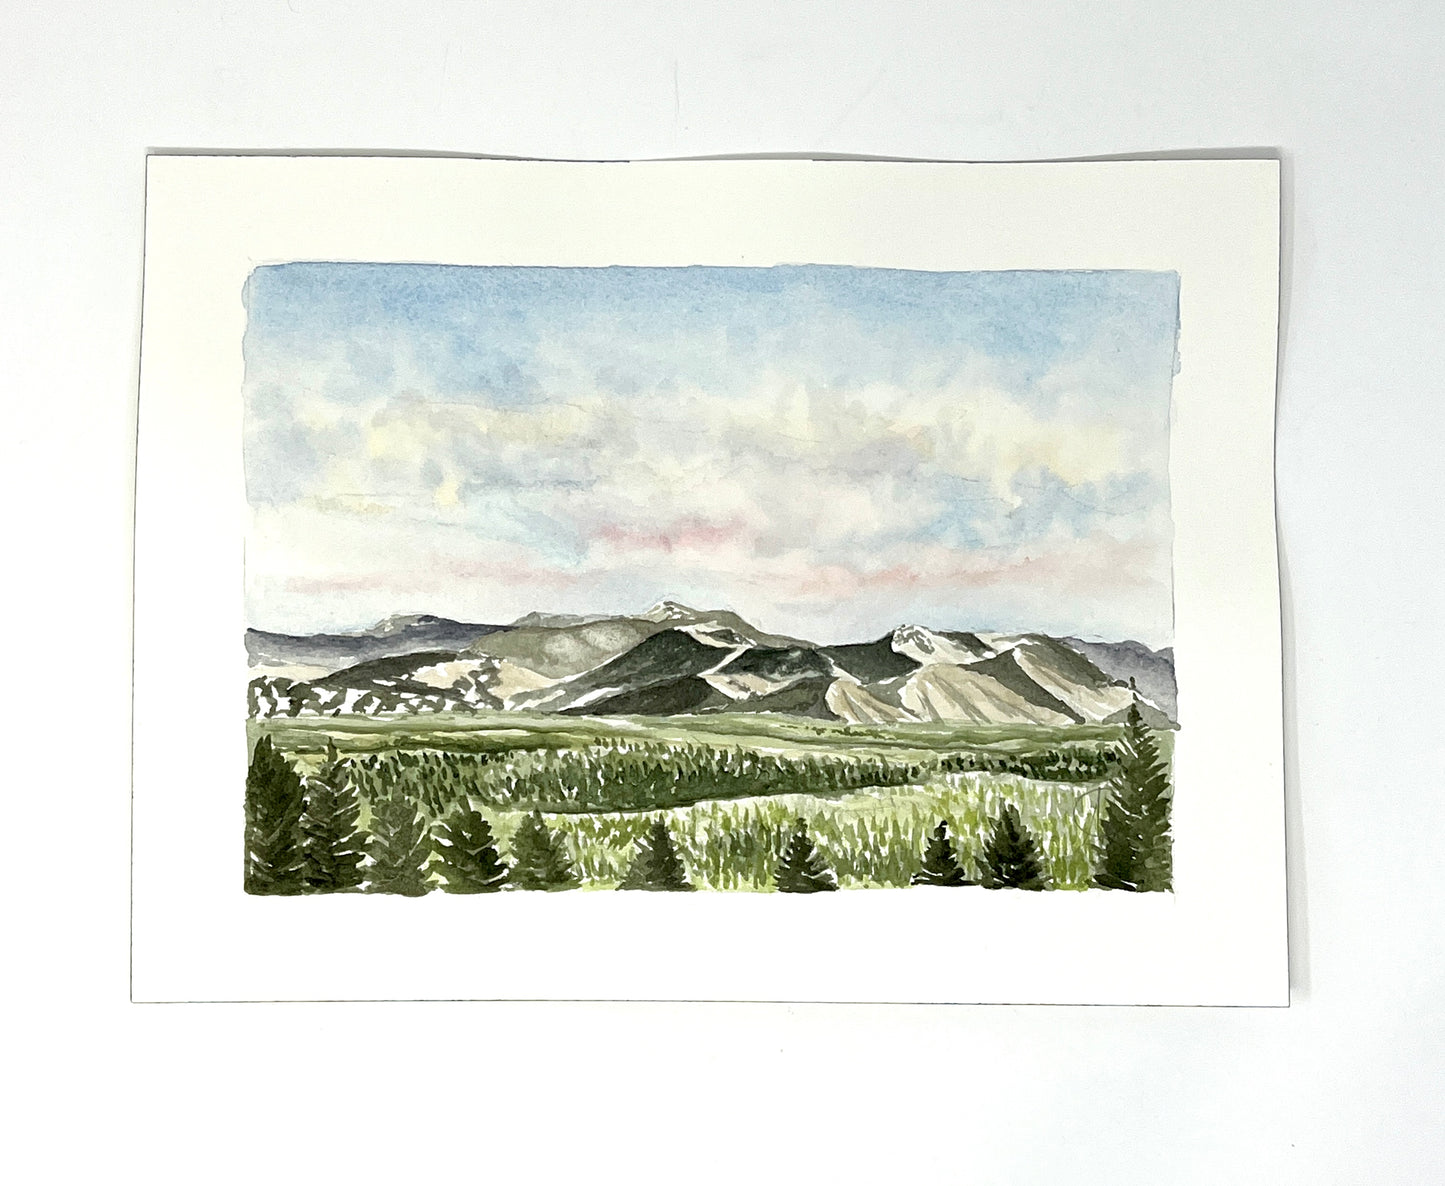 Natalie Connell:  Watercolor 9 x 12 inches (unframed)